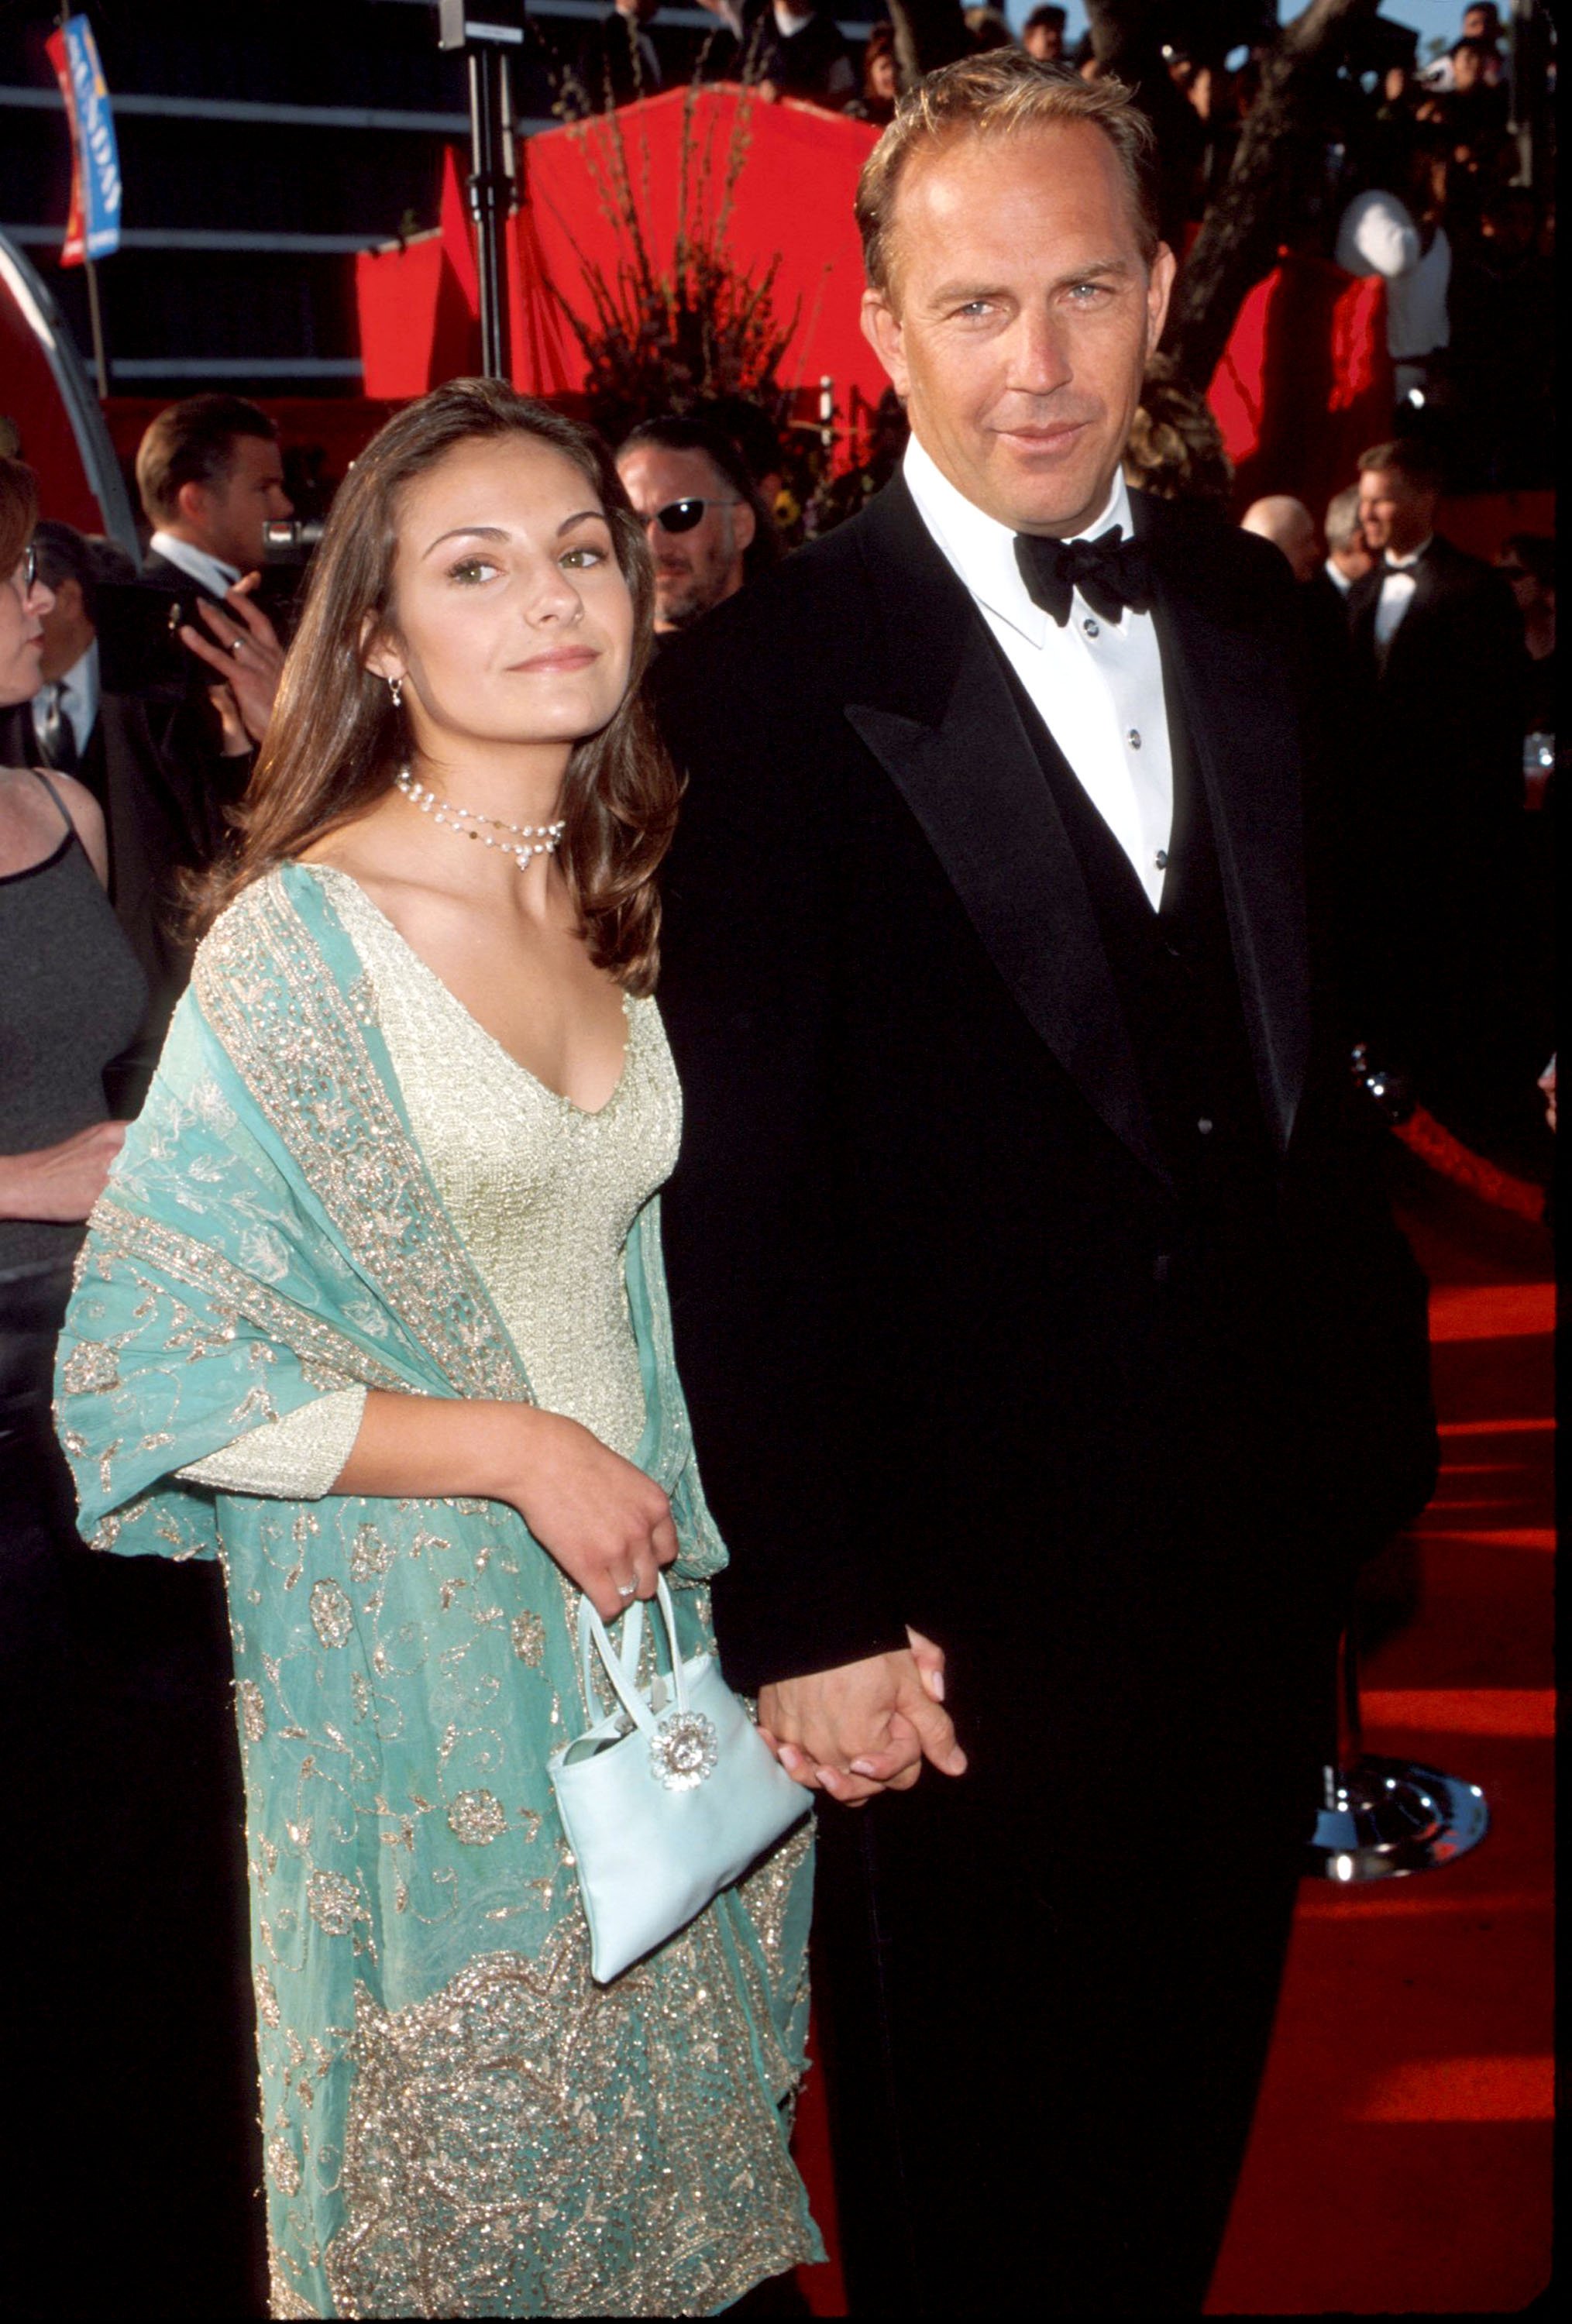 Annie and Kevin Costner at the 71st Annual Academy Awards in Los Angeles, California, on March 21, 1999. | Source: Getty Images